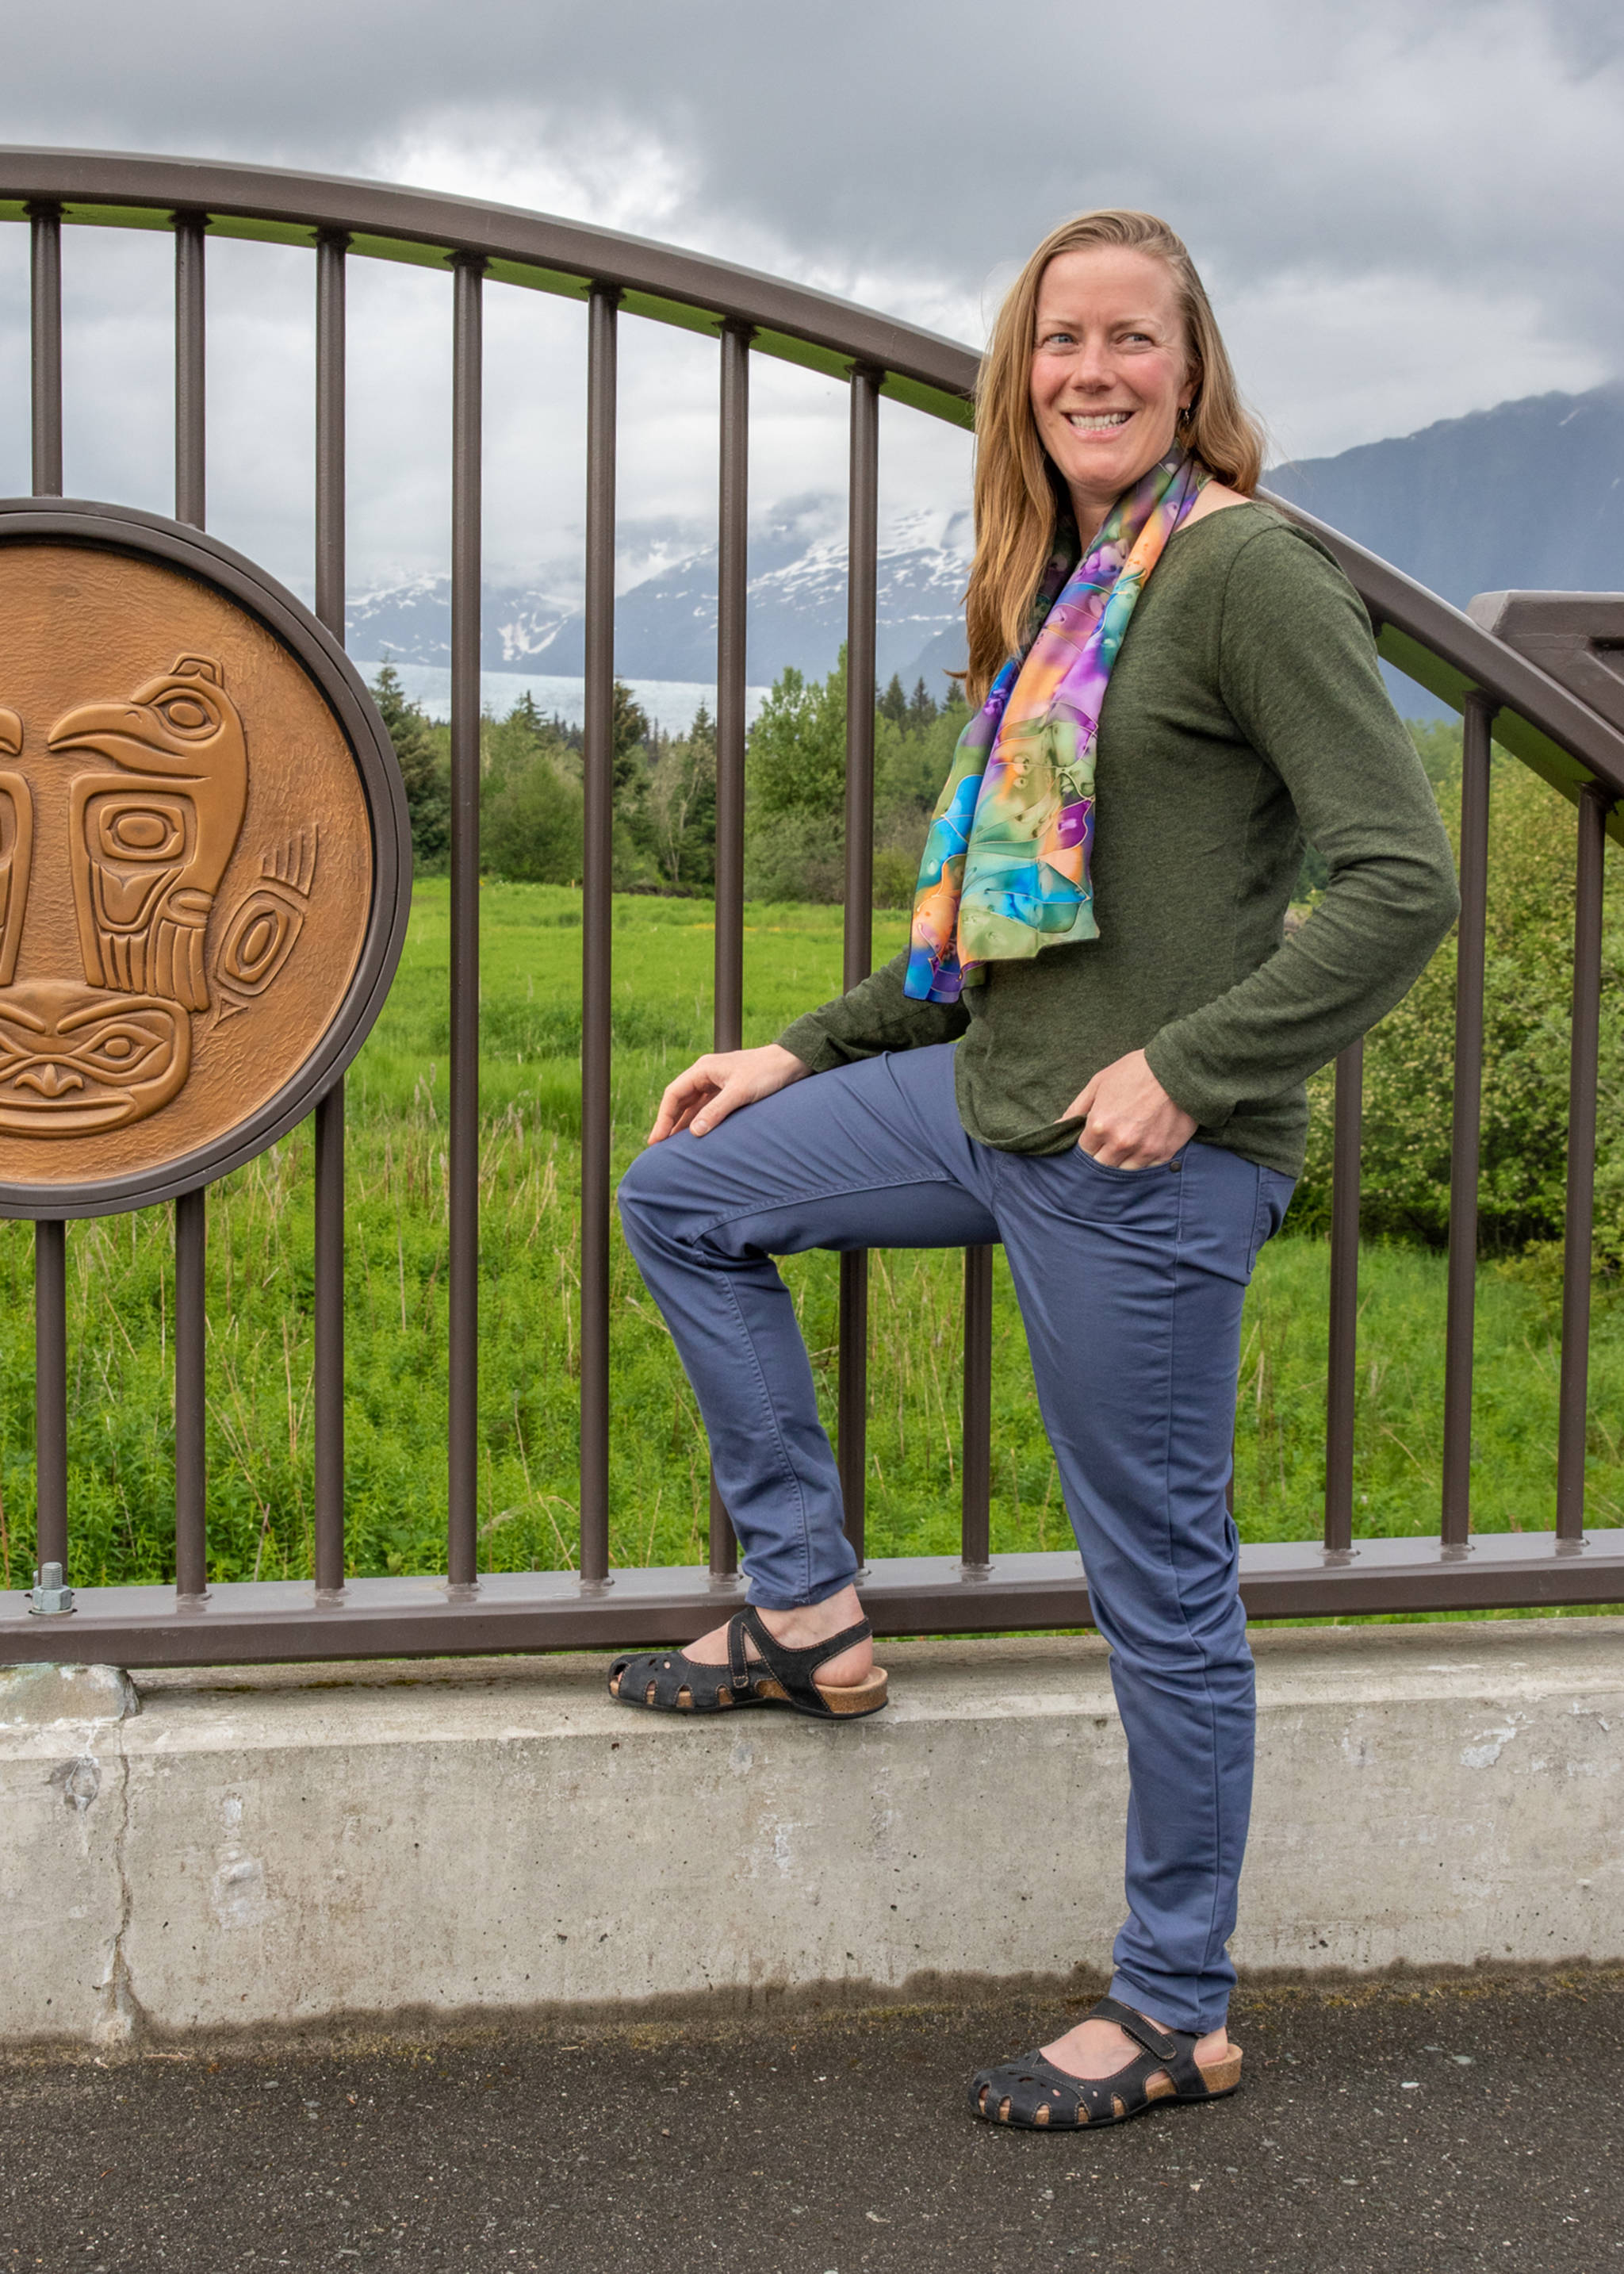 June 9, 2019: Laura Baker has a style that goes straight from work to play. A physical therapist, she wears clothes that support a professional and active lifestyle. She is wearing a heather green pullover from J. Crew, slate blue trousers from Patagonia and black sandals from Earth Origins. Her accessories include a multi-colored silk scarf from Tasmania and earrings by Juneau artist, Julienne Pacheco, WILD by Nature. (Kerry Howard | For the Juneau Empire)